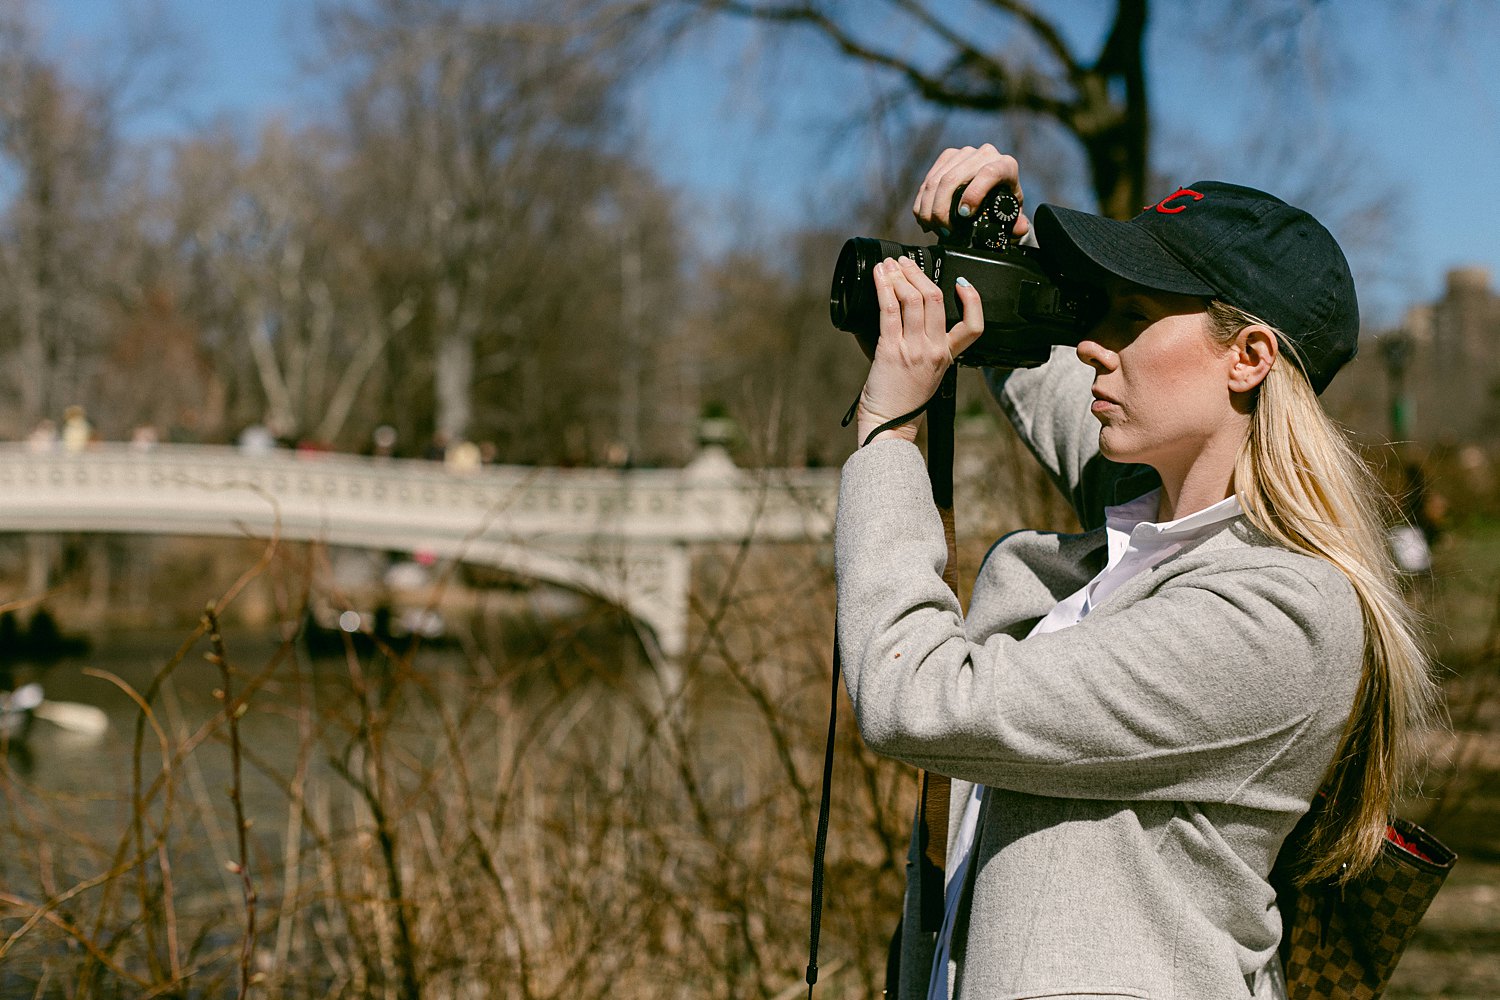 Woman in baseball cap holding camera up to eye in Central Park NYC